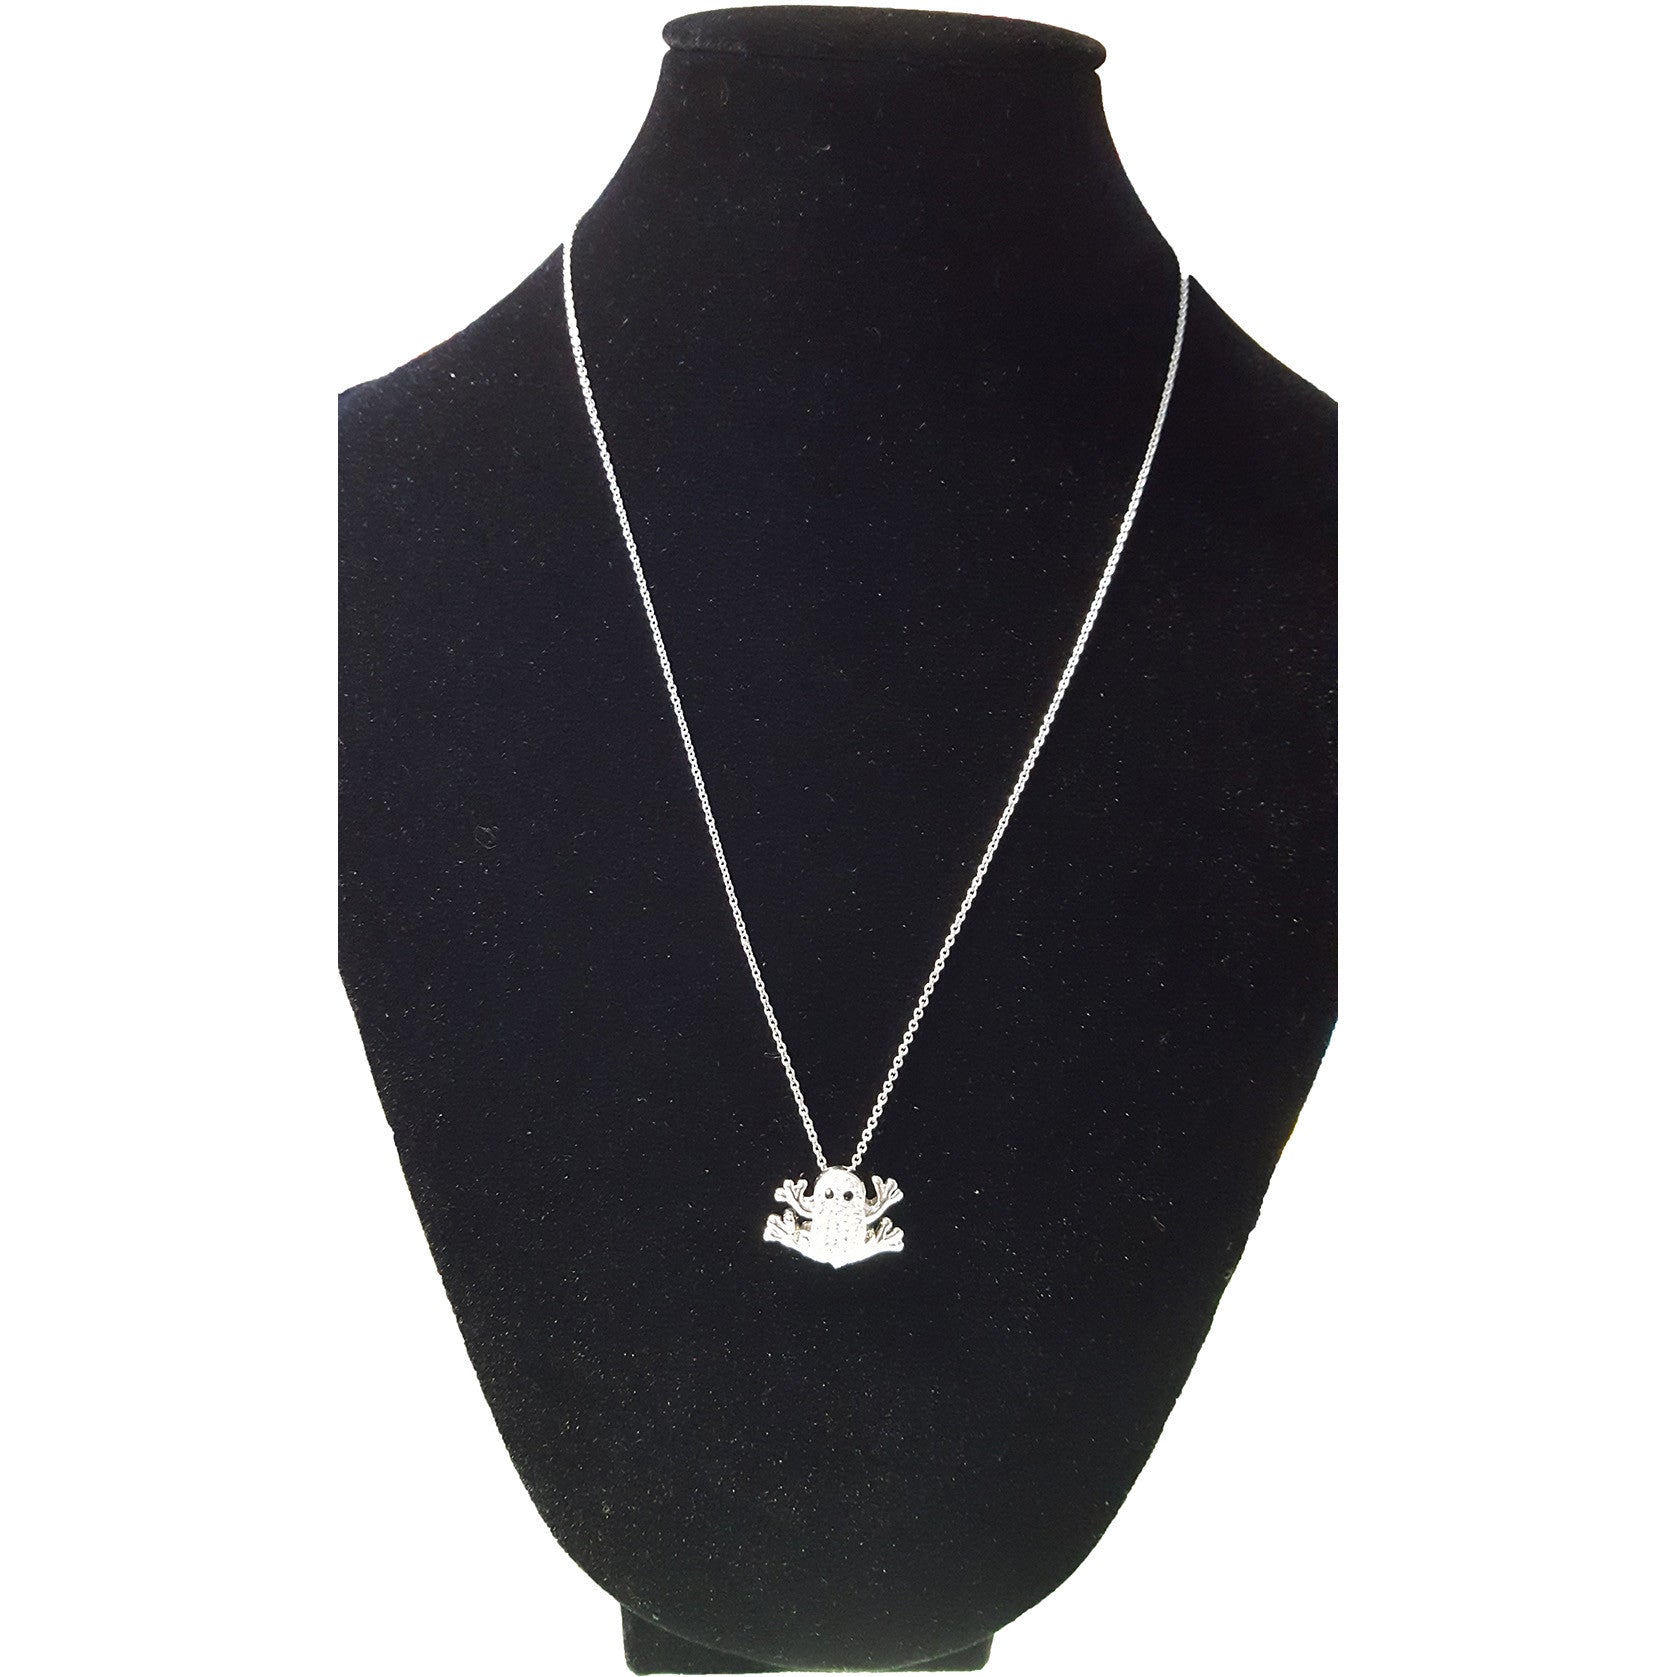 Frog Pendant Necklace - Critter Country Supply Ltd.